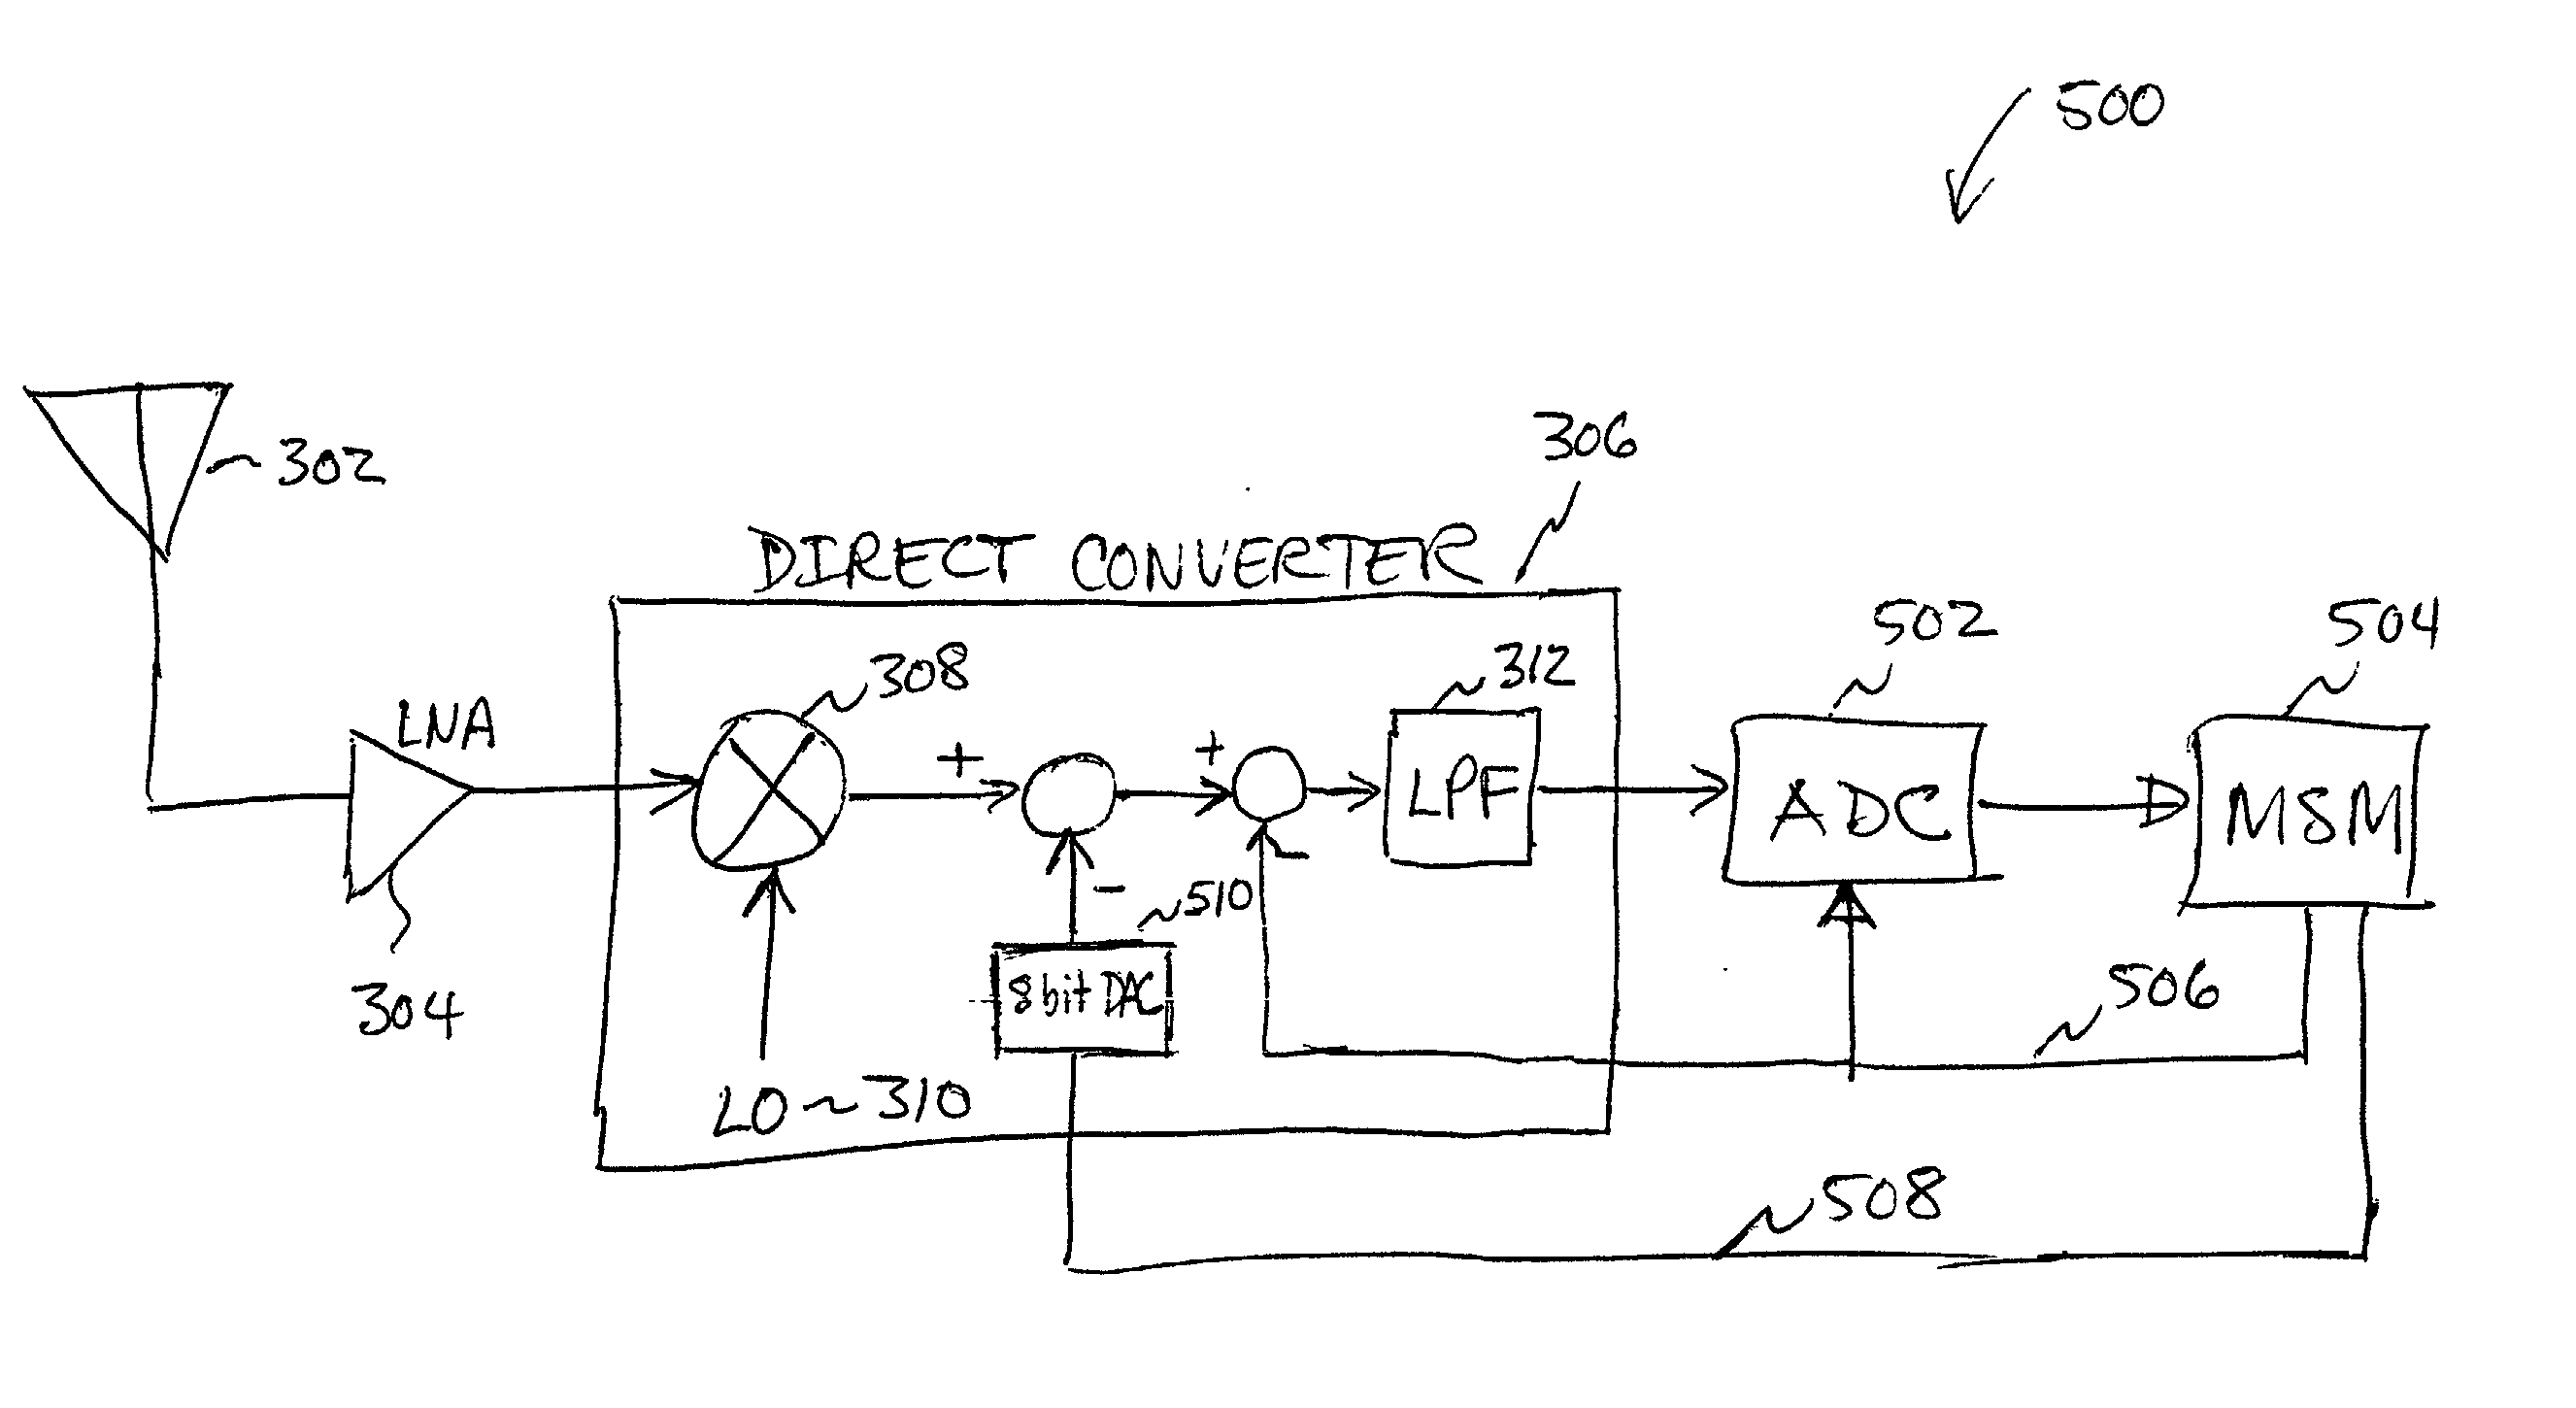 Direct current offset cancellation for mobile station modems using direct conversion